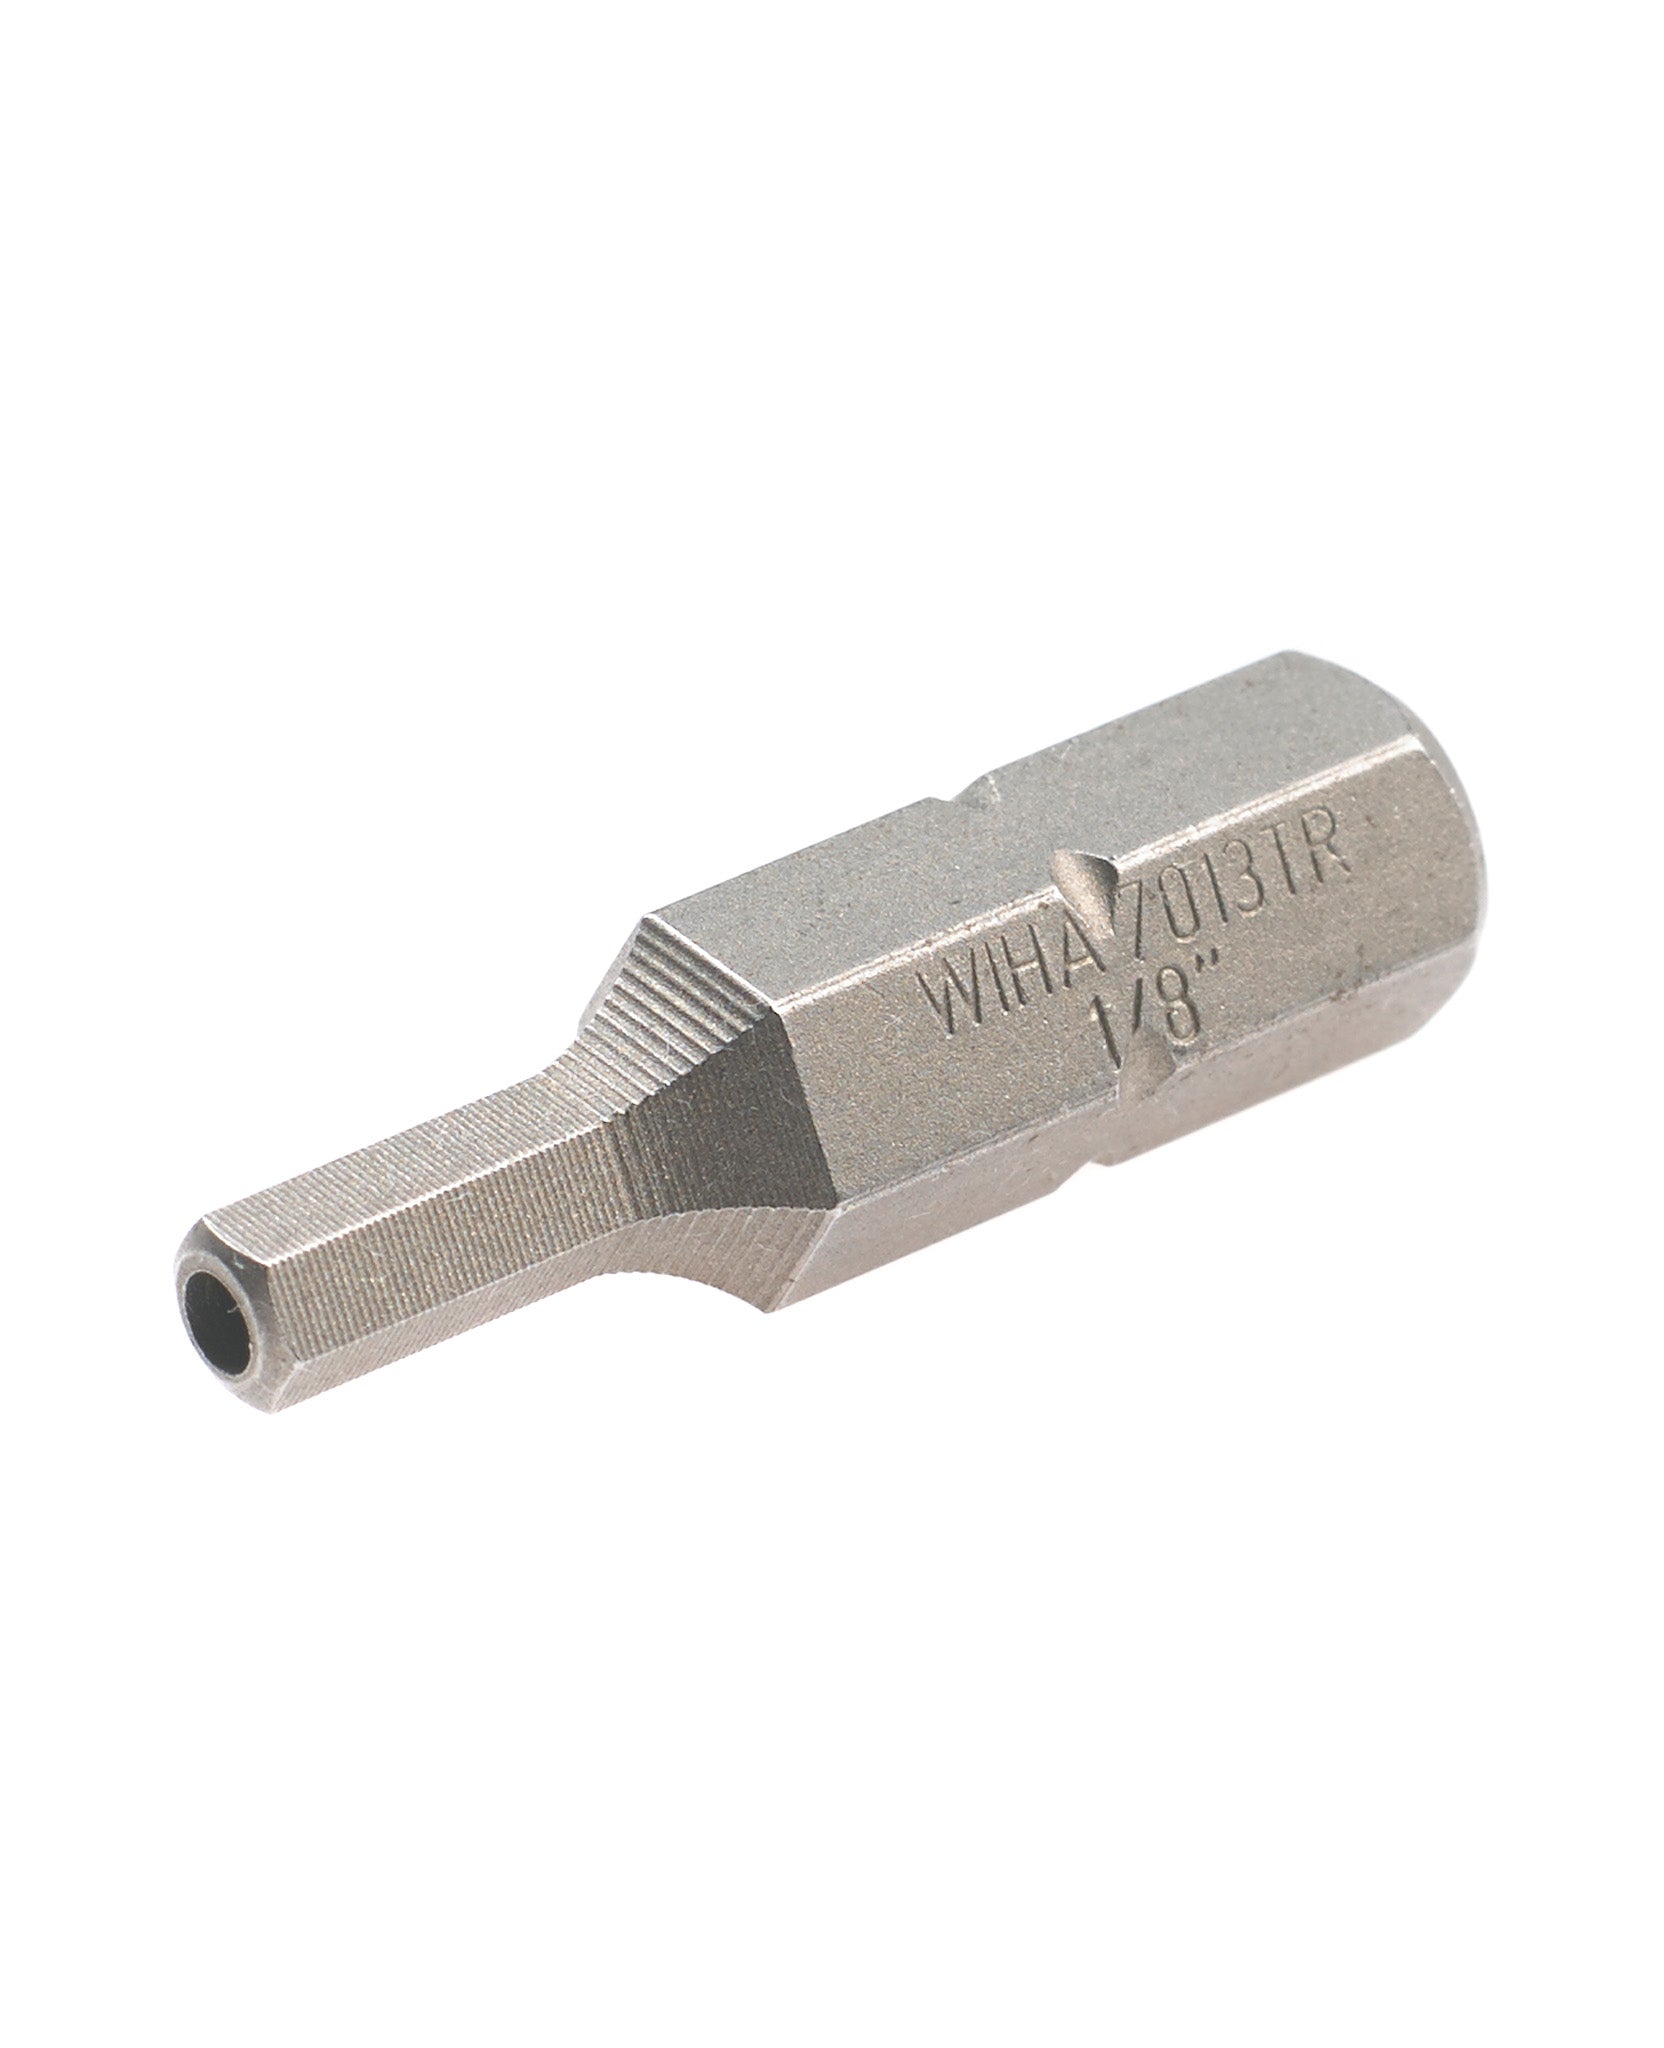 Metal security driver bit for anti-tamper plate for standard security range at The Key Safe Company